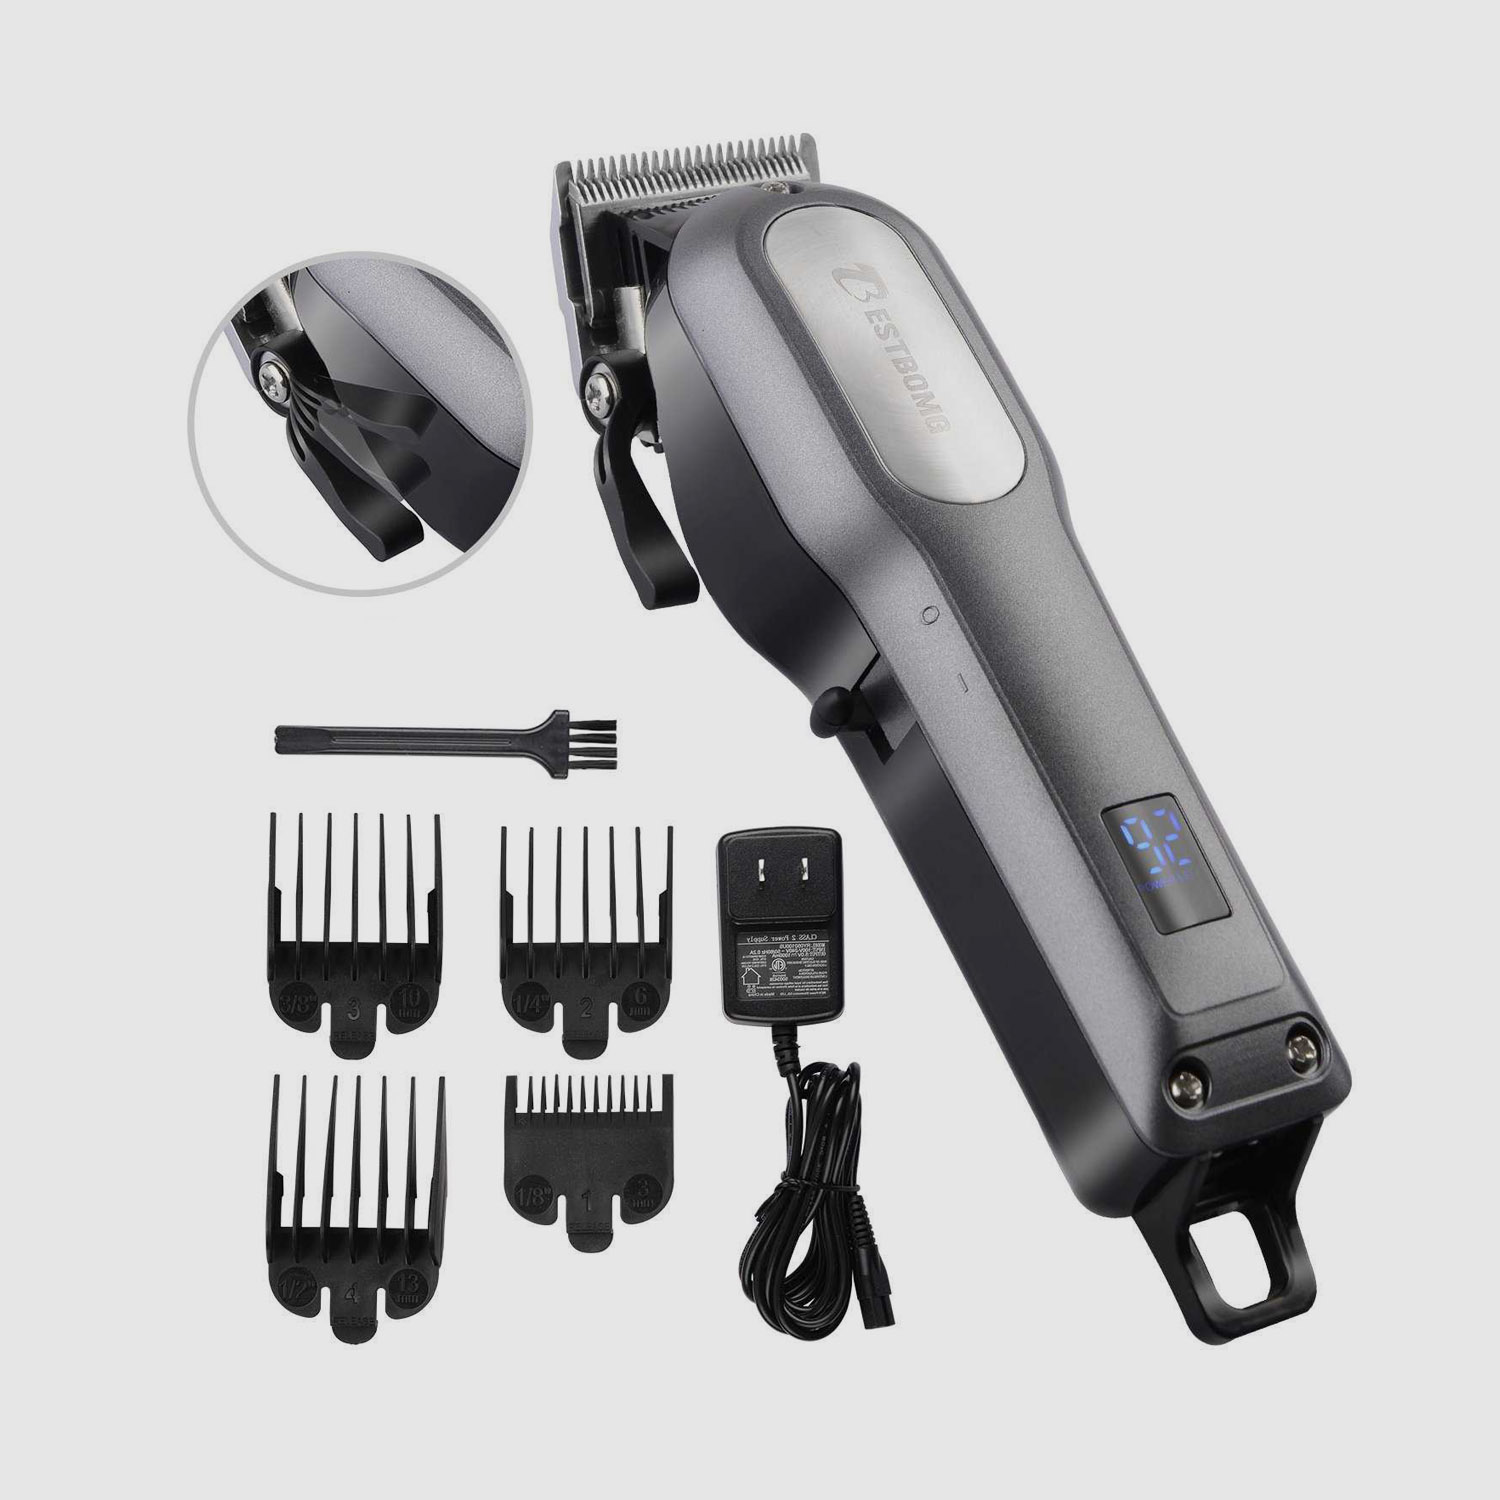 Home Barber Hair Trimmer na may Precision Blades Heavy Duty Motor LED Display